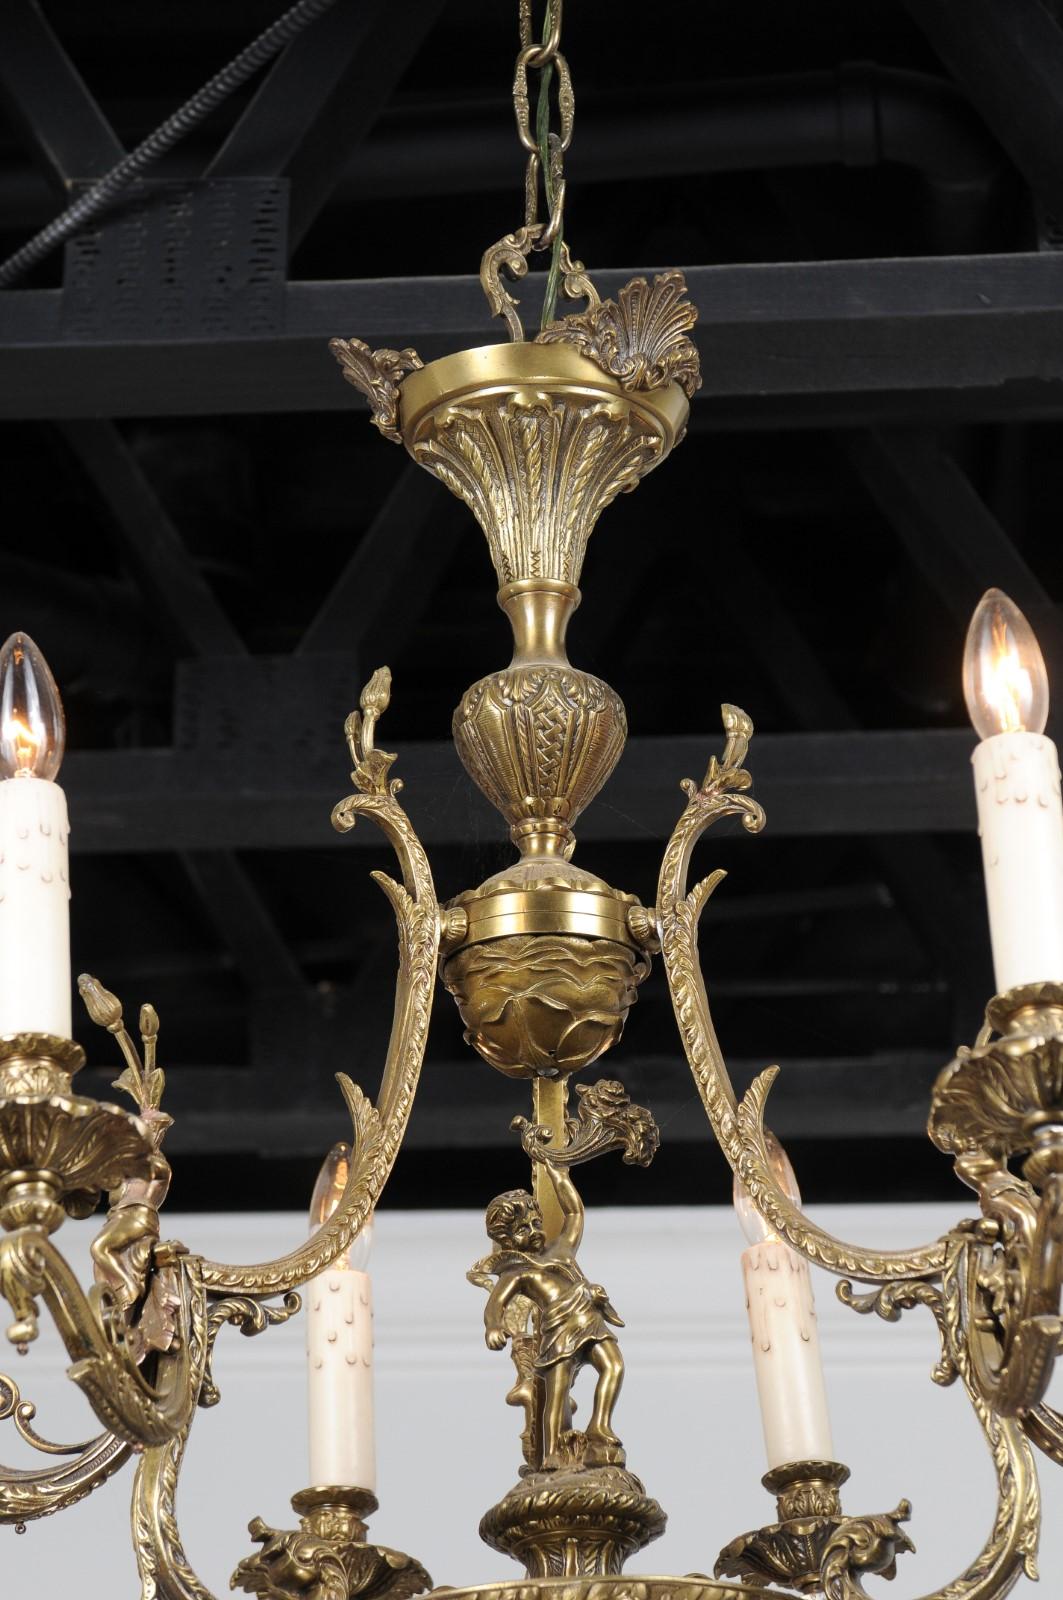 Spanish 19th Century Bronze Six-Light Chandelier with Cherubs and Floral Decor In Good Condition For Sale In Atlanta, GA